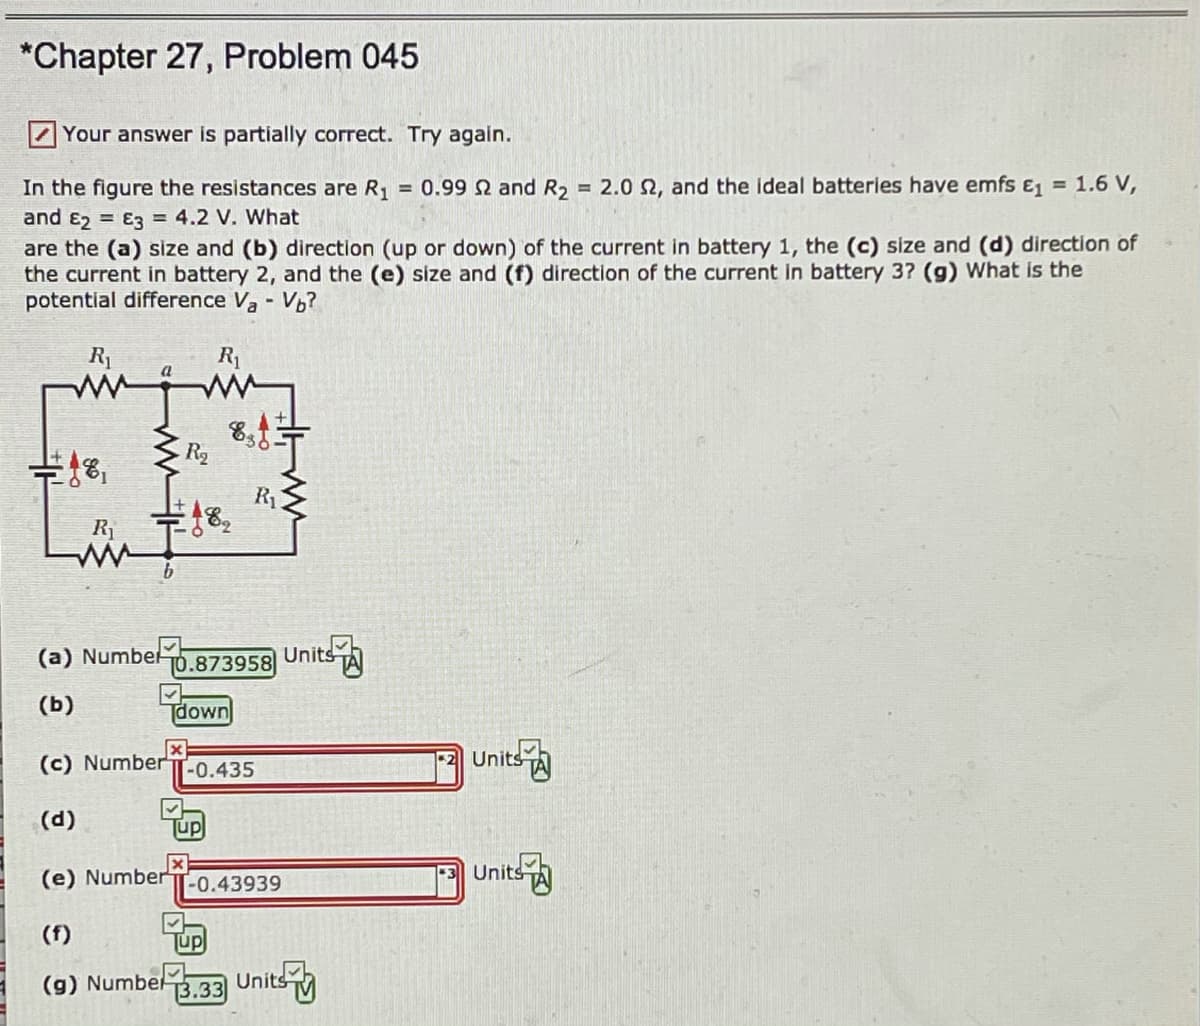 *Chapter 27, Problem 045
Your answer is partially correct. Try again.
= 2.0 2, and the ideal batteries have emfs E, = 1.6 V,
In the figure the resistances are R, = 0.99 Q and R2
and E2 = E3 = 4.2 V. What
are the (a) size and (b) direction (up or down) of the current in battery 1, the (c) size and (d) direction of
the current in battery 2, and the (e) size and (f) direction of the current in battery 3? (g) What is the
potential difference V, - Vb?
R1
R1
R2
R1
(a) Numbelo.873958 Units A
(ь)
Tdown
Units
(c) Number
-0.435
(d)
Tup
(e) Number
Units-
-0.43939
(f)
Tup
(g) Numbel.33 Units
